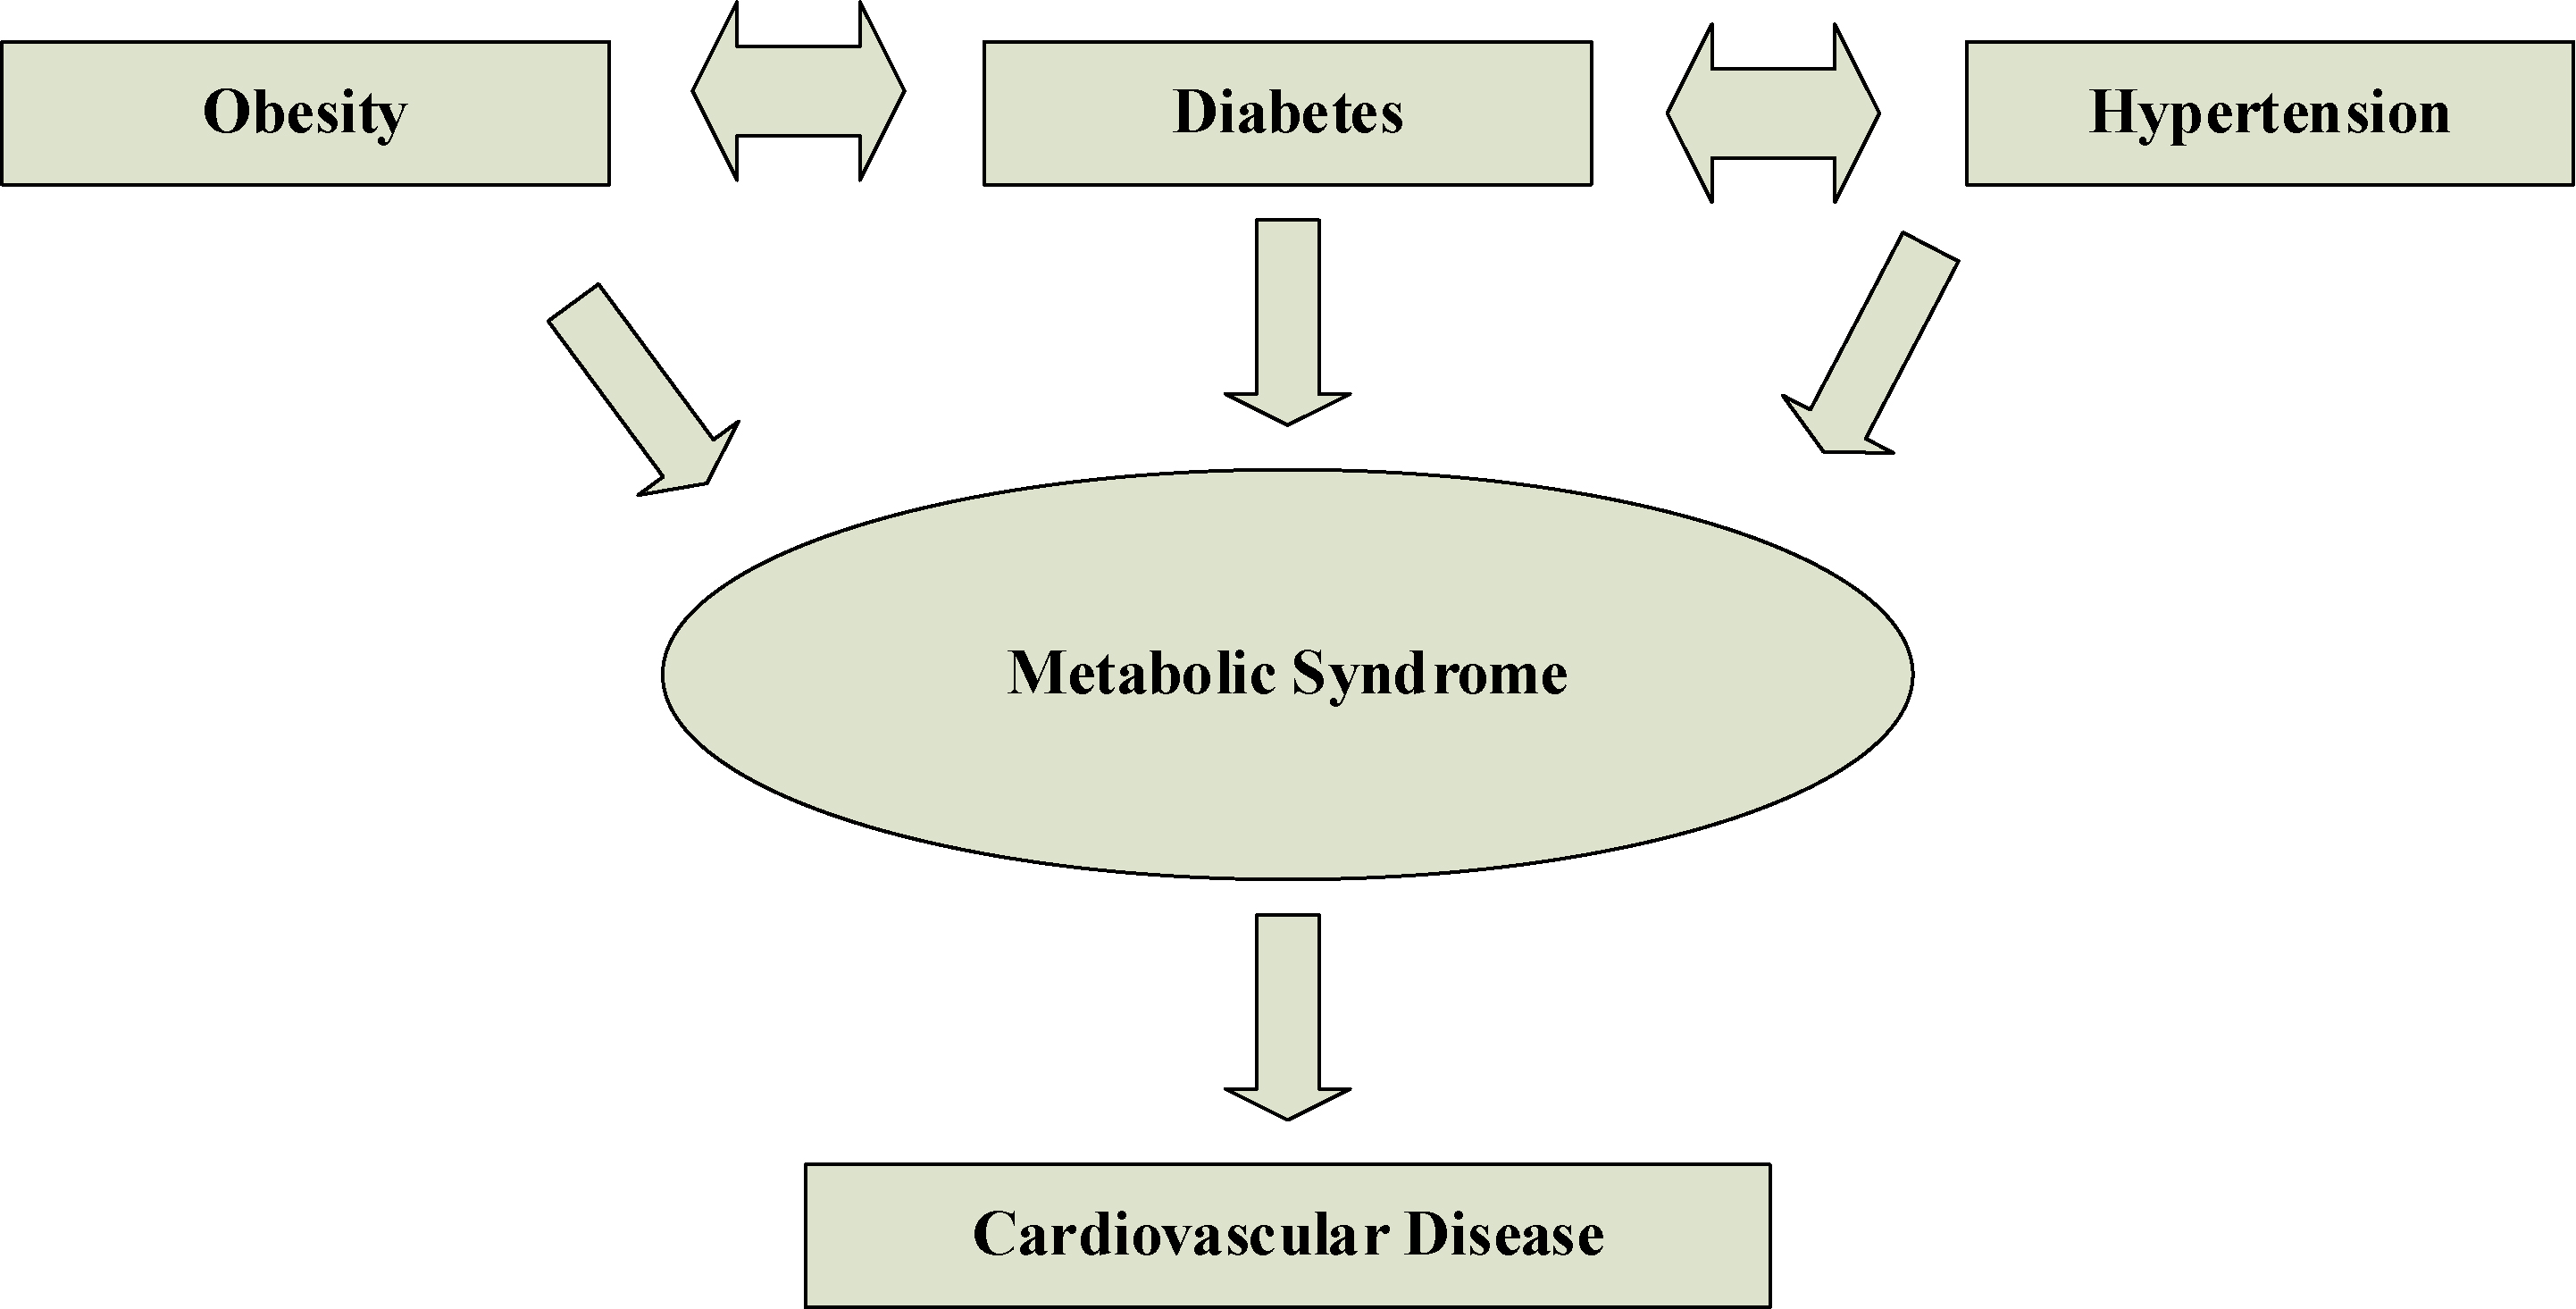 General structure of the relationship between MetS risk factors and CVD.